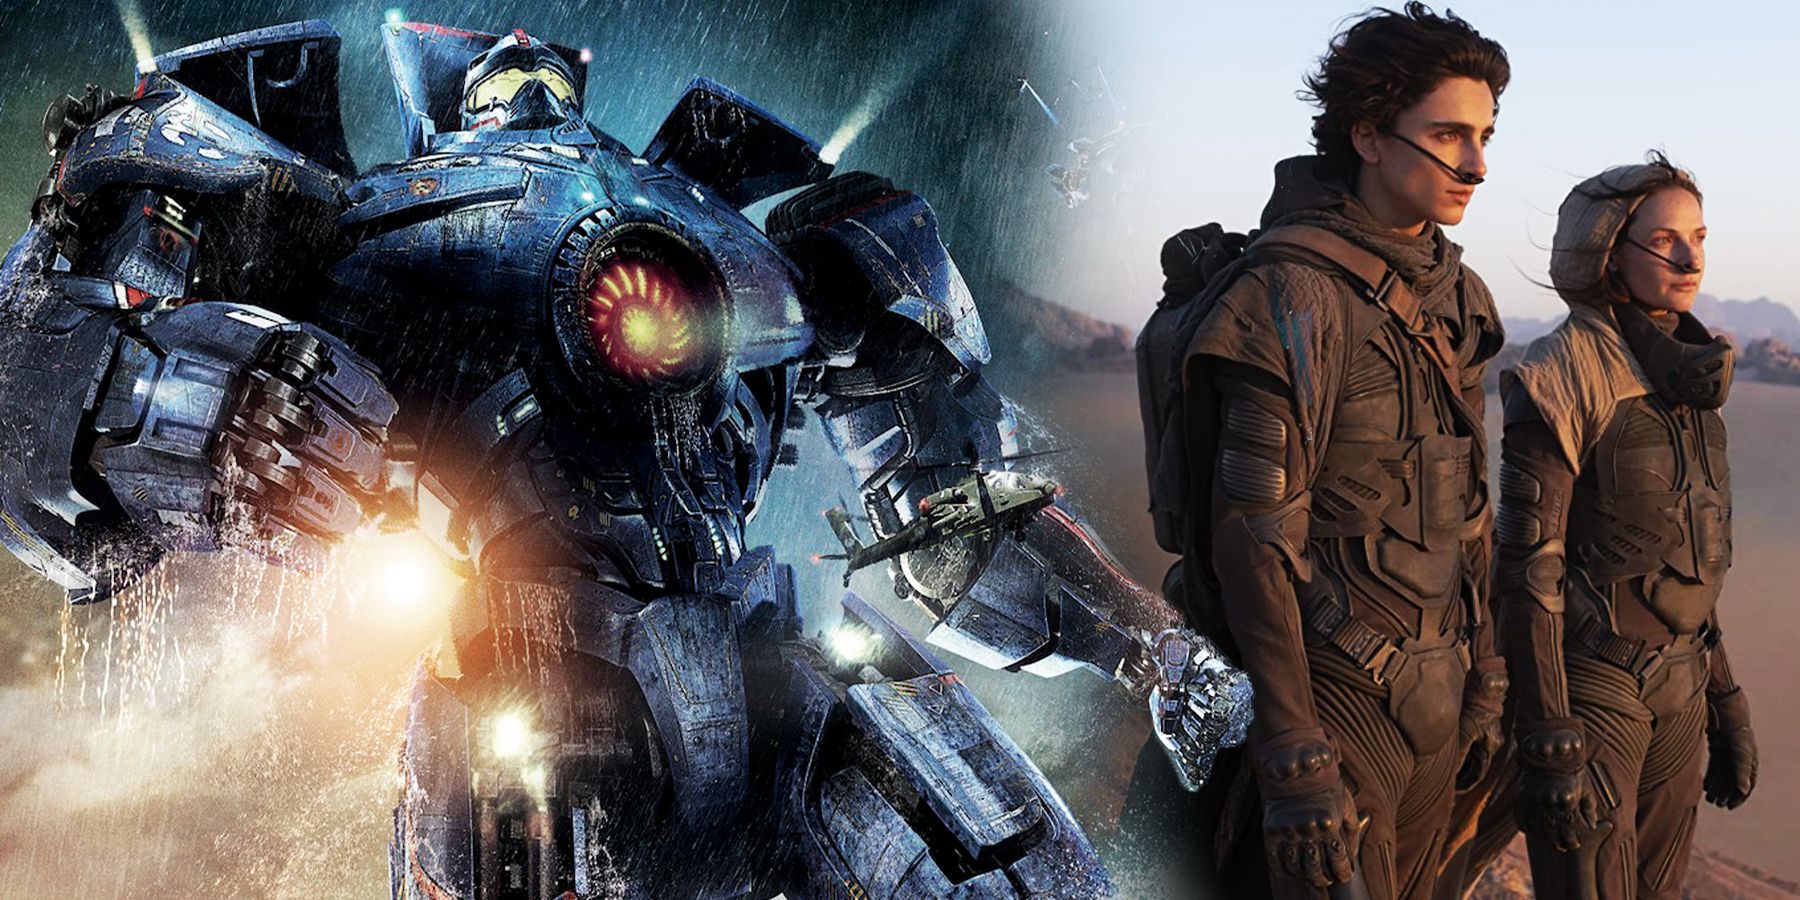 On the left, the Jaeger Striker Eureka emerges from water ready for a fight. On the right, Paul Atreides and Lady Jessica stand in the desert.